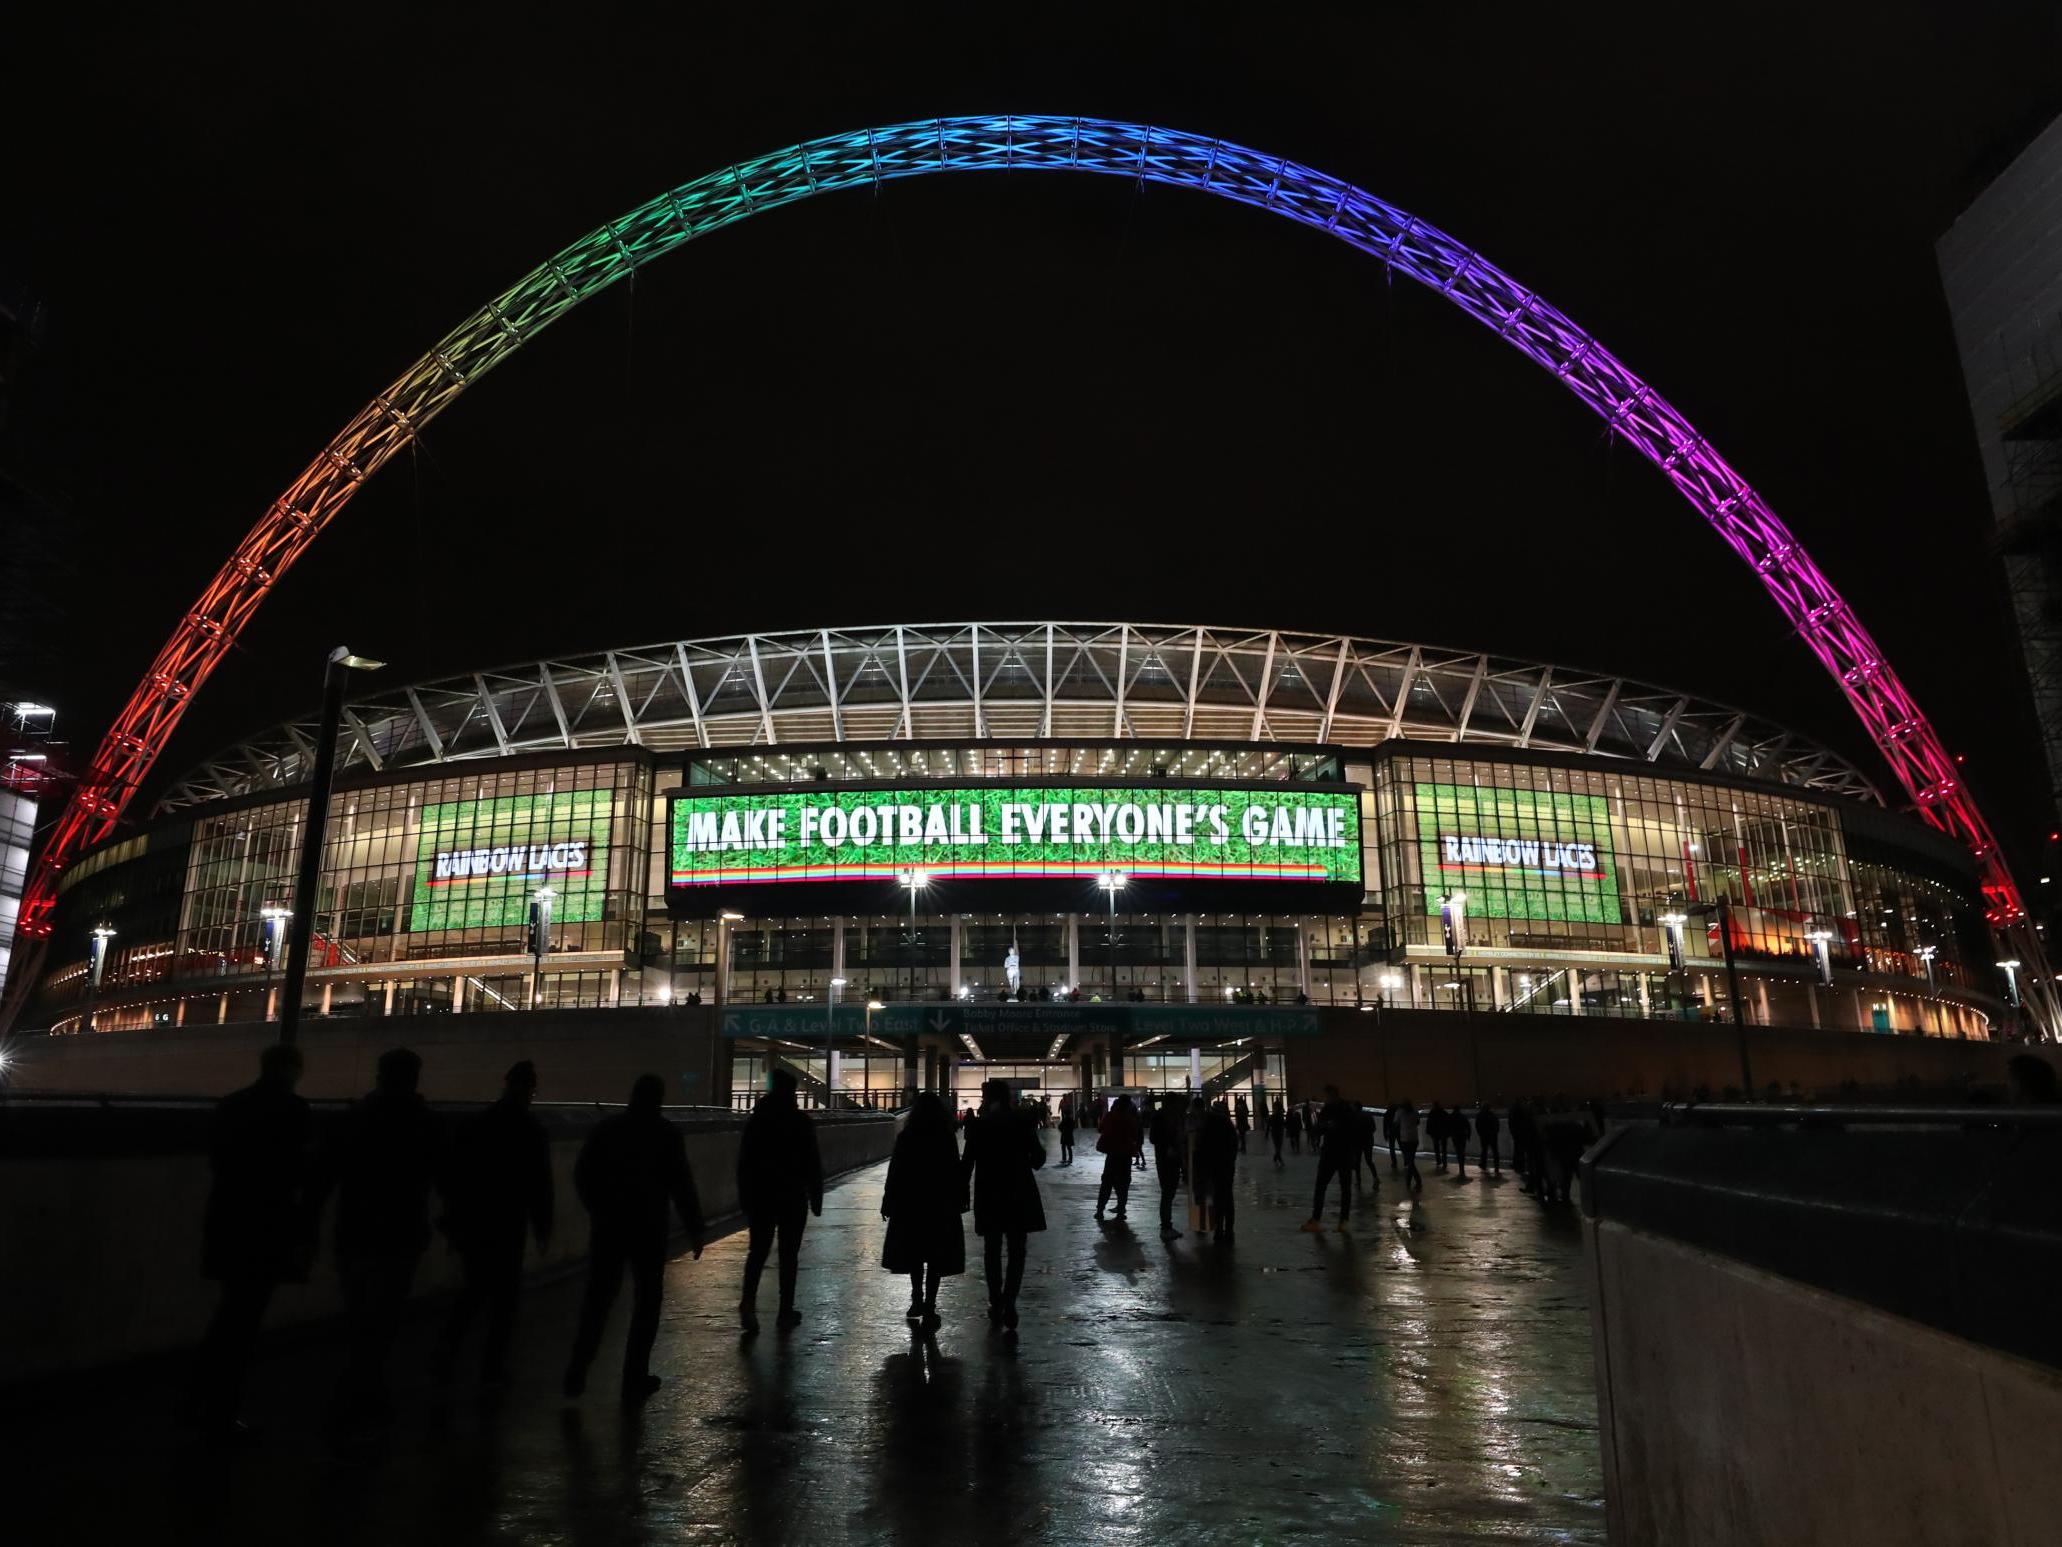 The FA will join a crowd of over one million at the the Pride in London parade